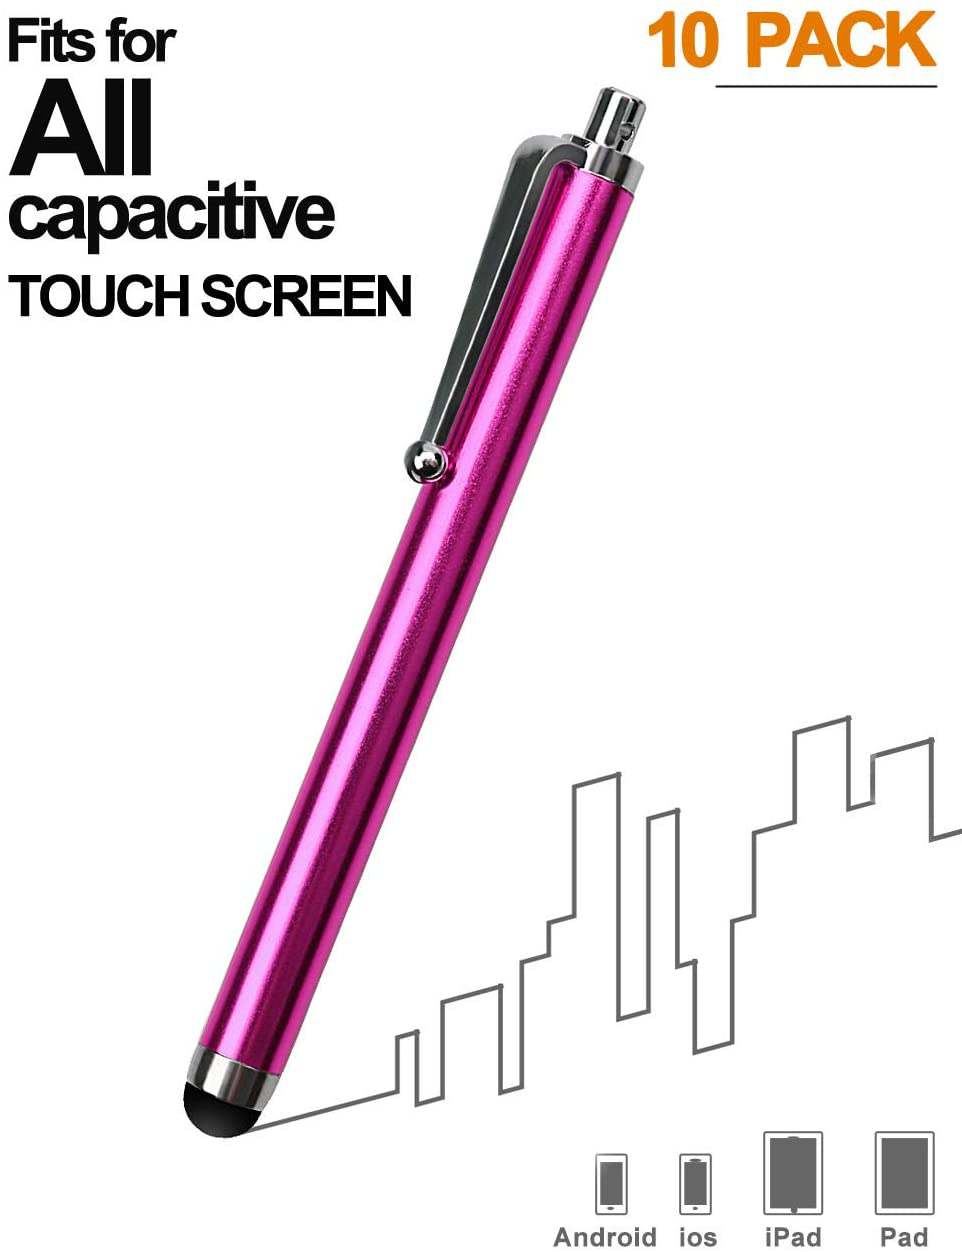 Stylus Pens for Touch Screens, LIBERRWAY Stylus Pen 10 Pack of Pink Purple Black Green Silver Stylus Universal Touch Screen Capacitive Stylus Compatible with Kindle ipad iPhone Samsung